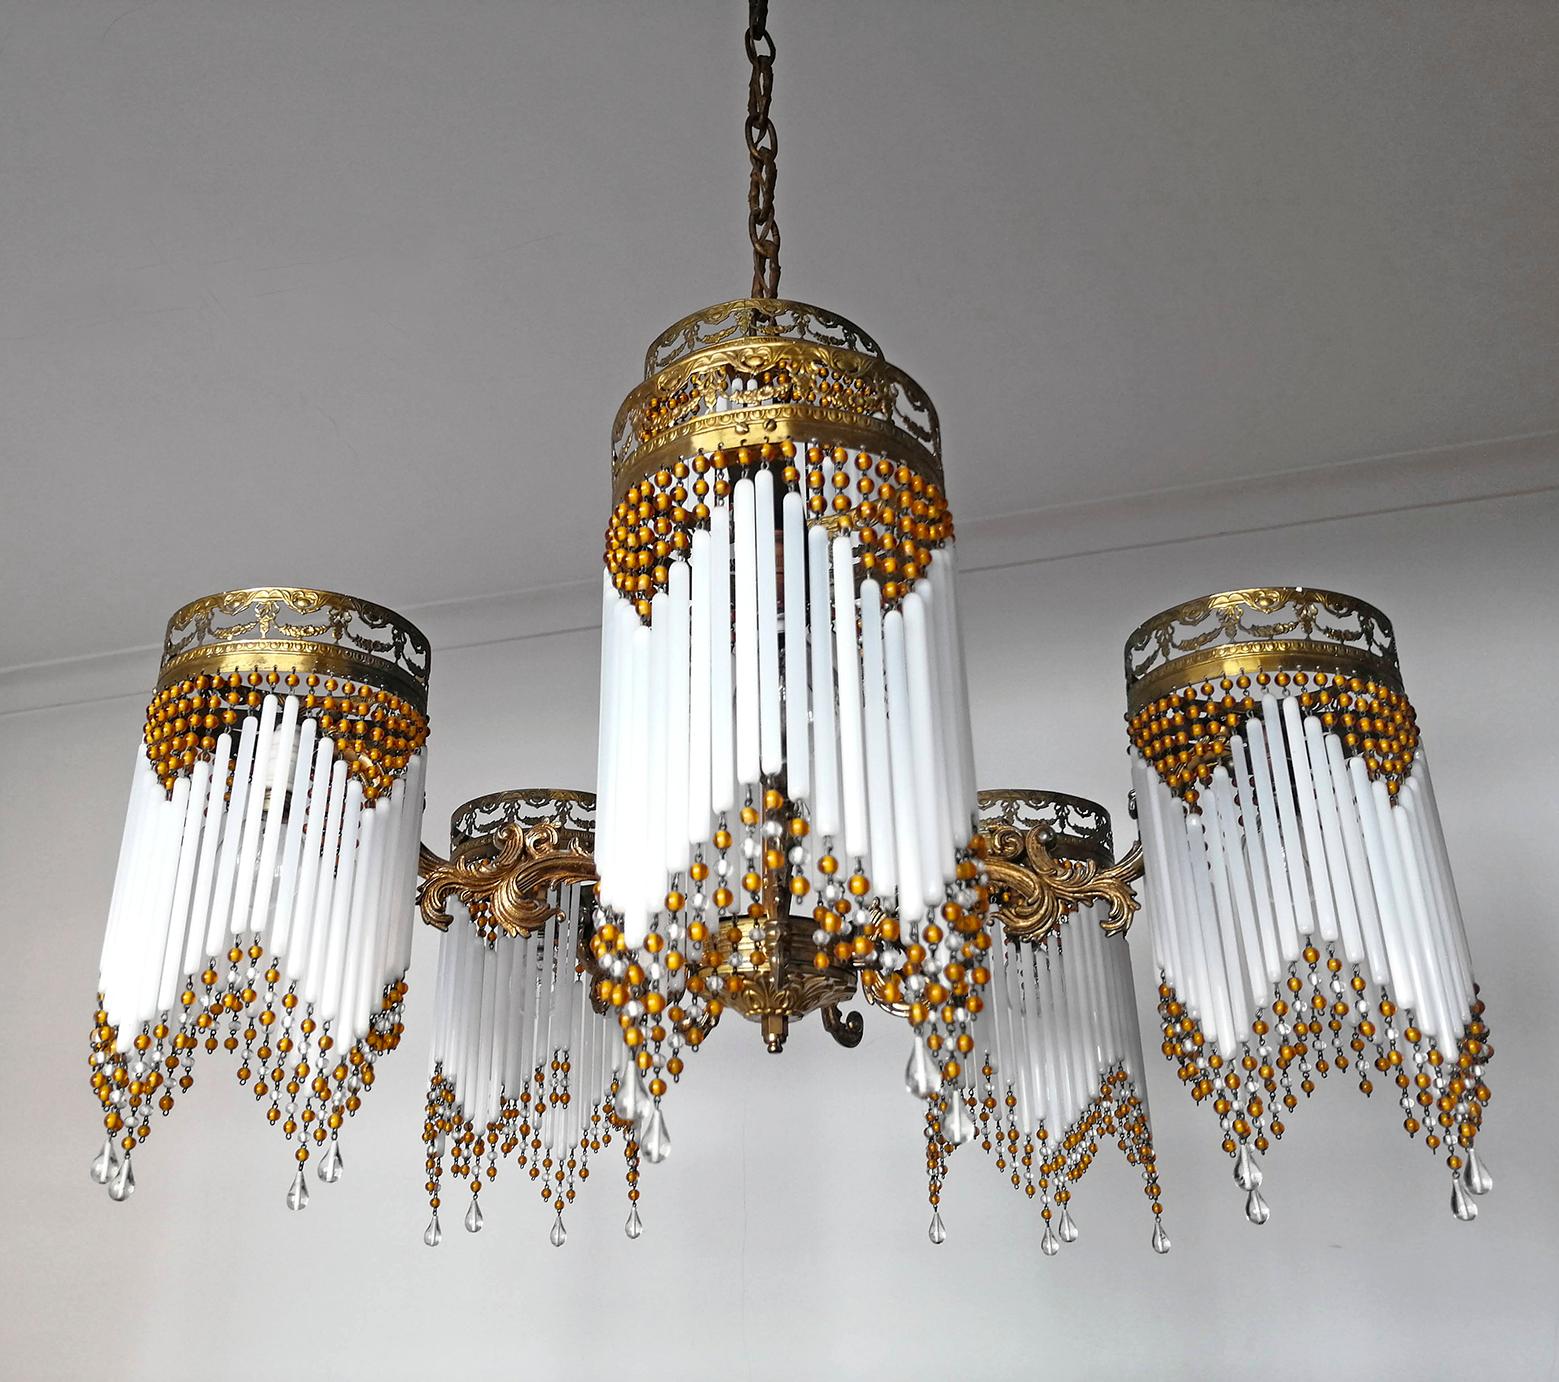 Hollywood Regency French Art Deco and Art Nouveau Amber Beaded Fringe and Gilt Ornate Chandelier